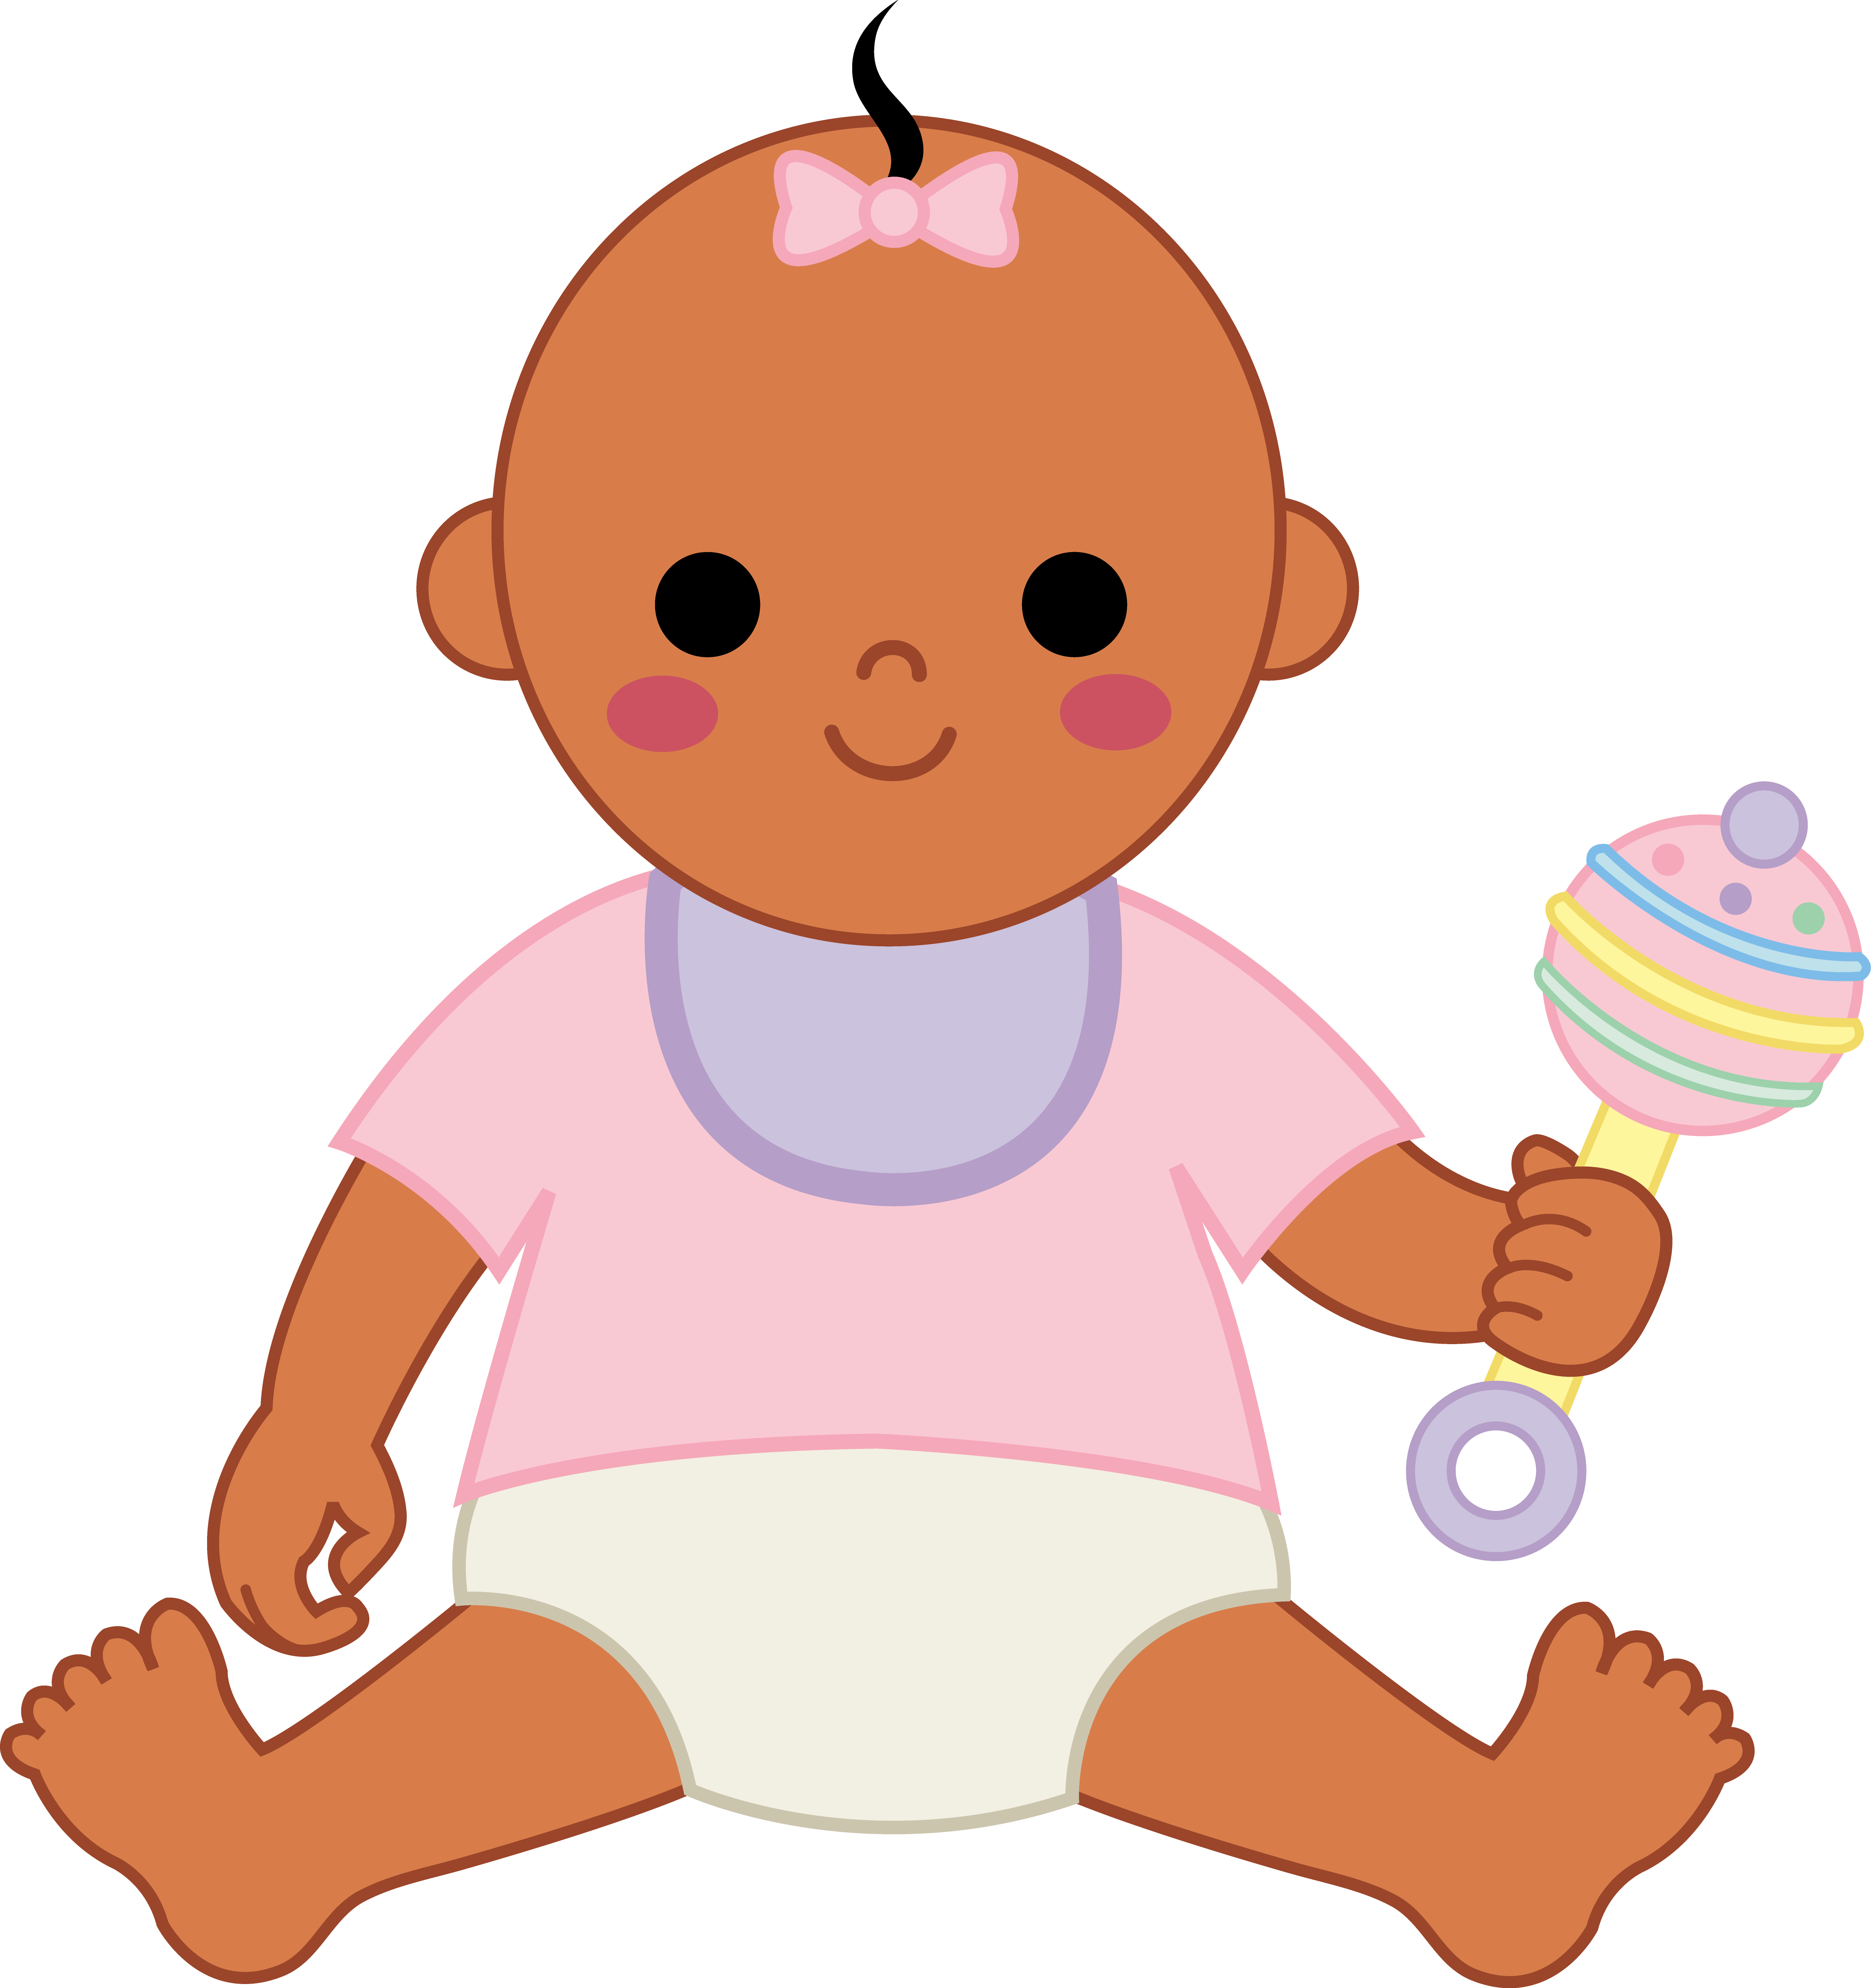 Baby doll clipart clipart images gallery for free download.